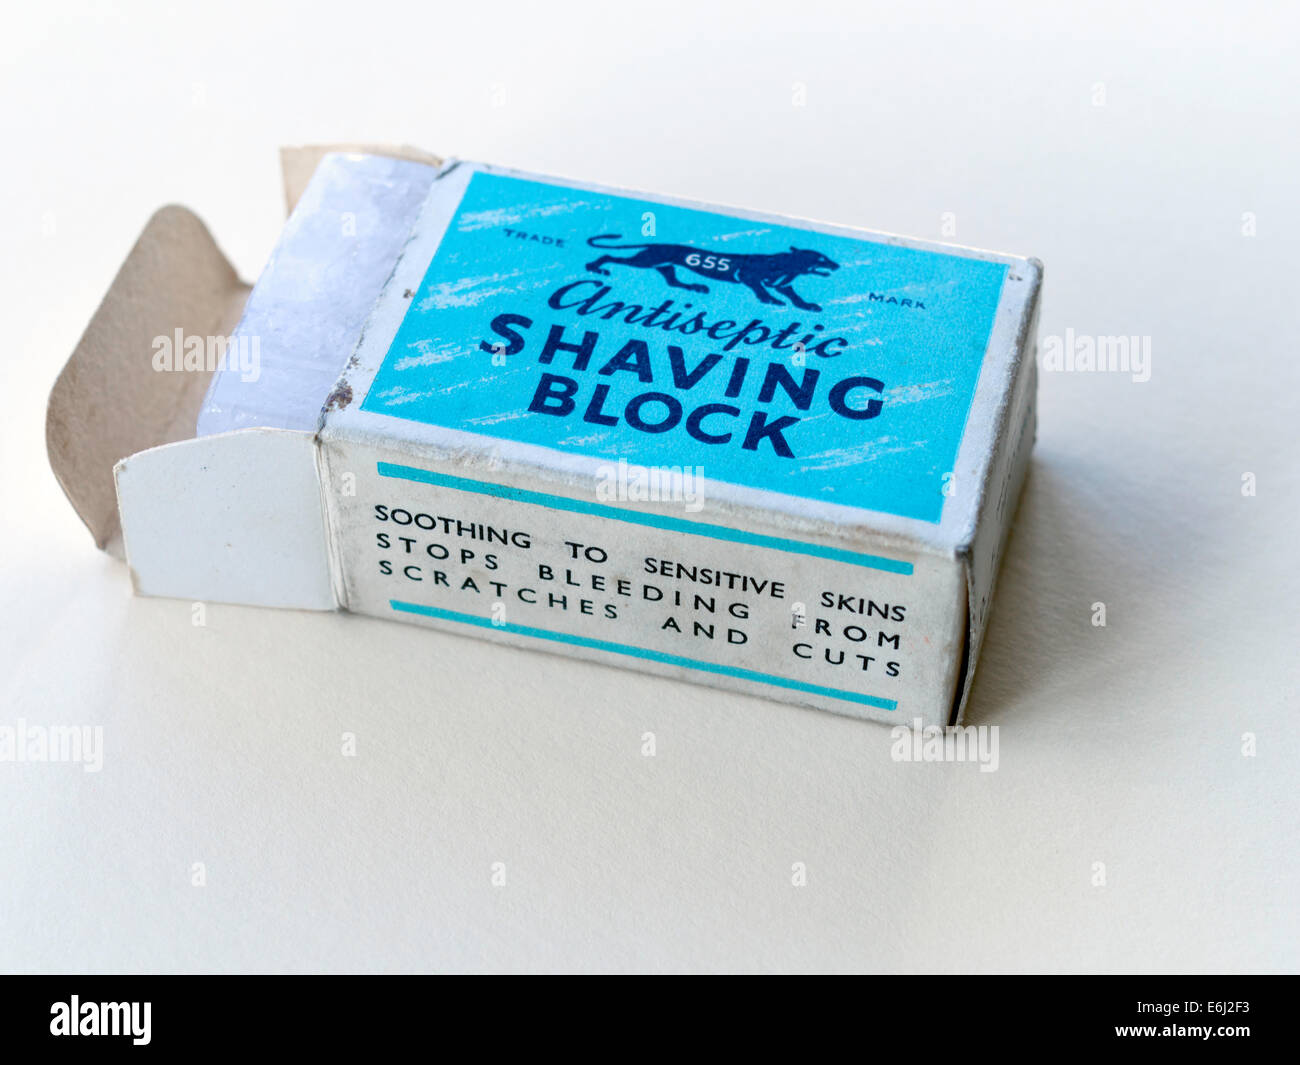 Antiseptic block for use after shaving to soothe sensitive skin and to stop bleeding from scratches and cuts date 1967 box open Stock Photo